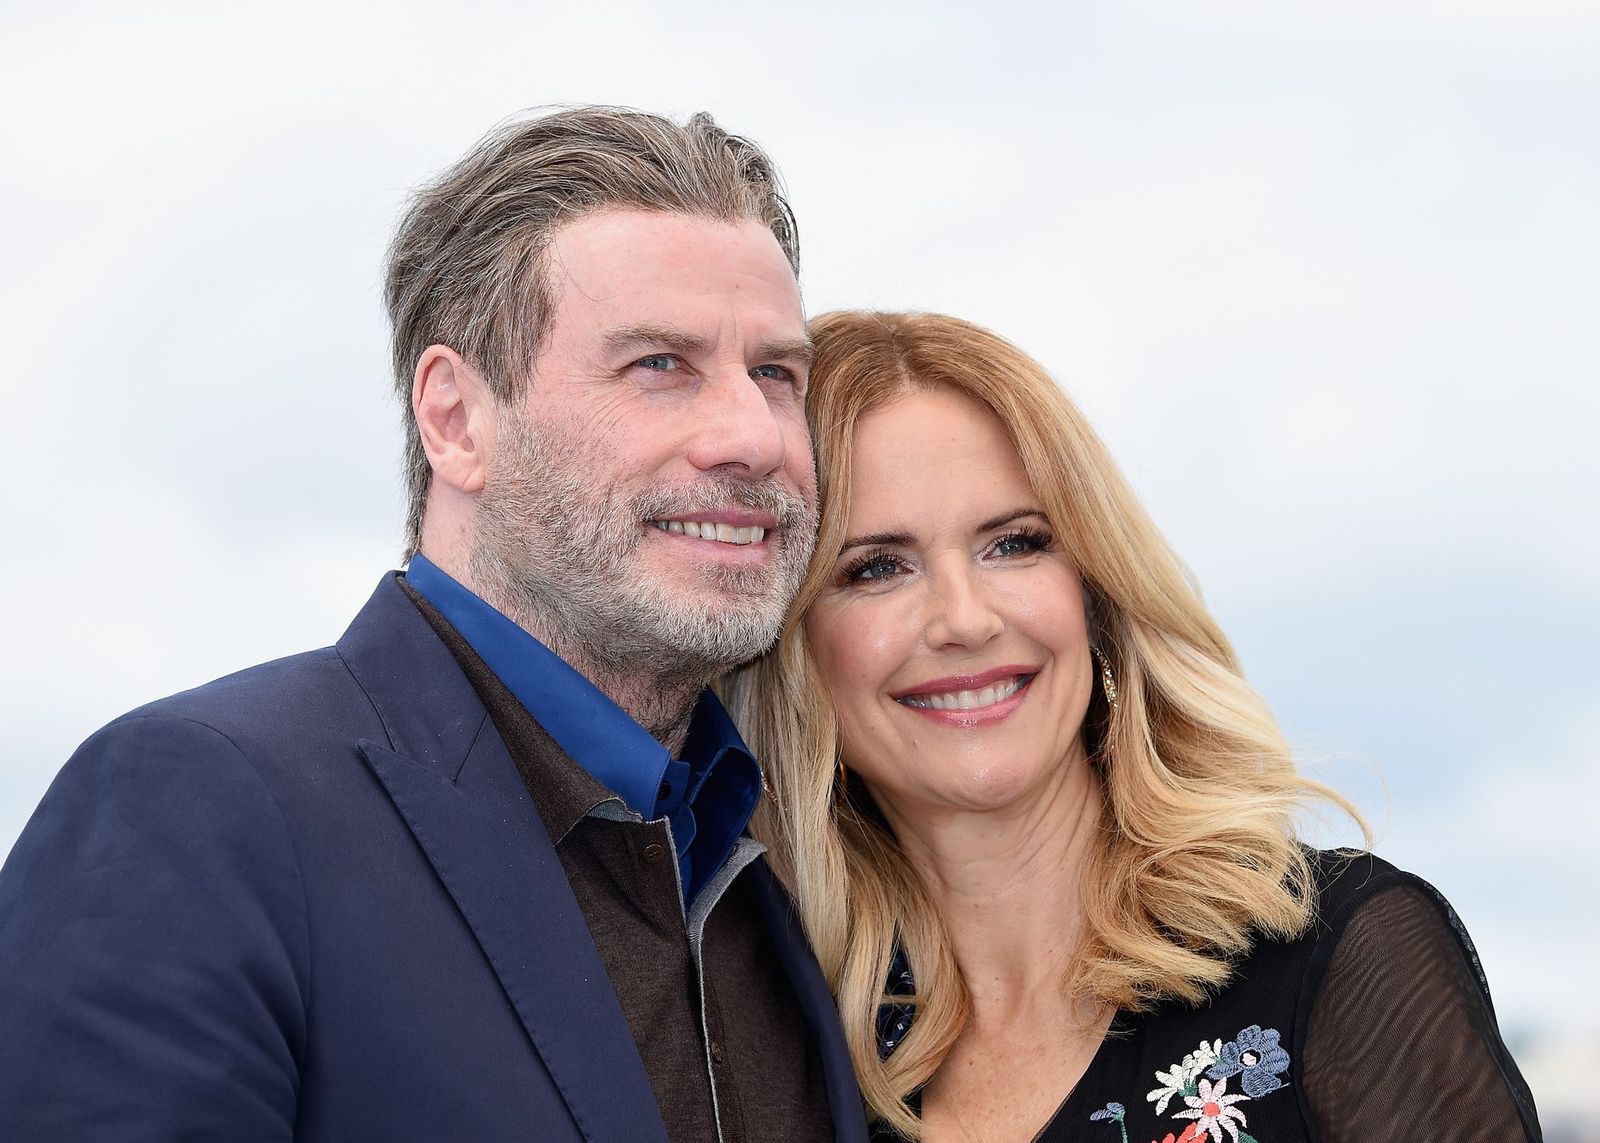 John Travolta and Kelly Preston at the 71st annual Cannes Film Festival on May 15, 2018, in Cannes, France | Photo: Dominique Charriau/WireImage/Getty Images